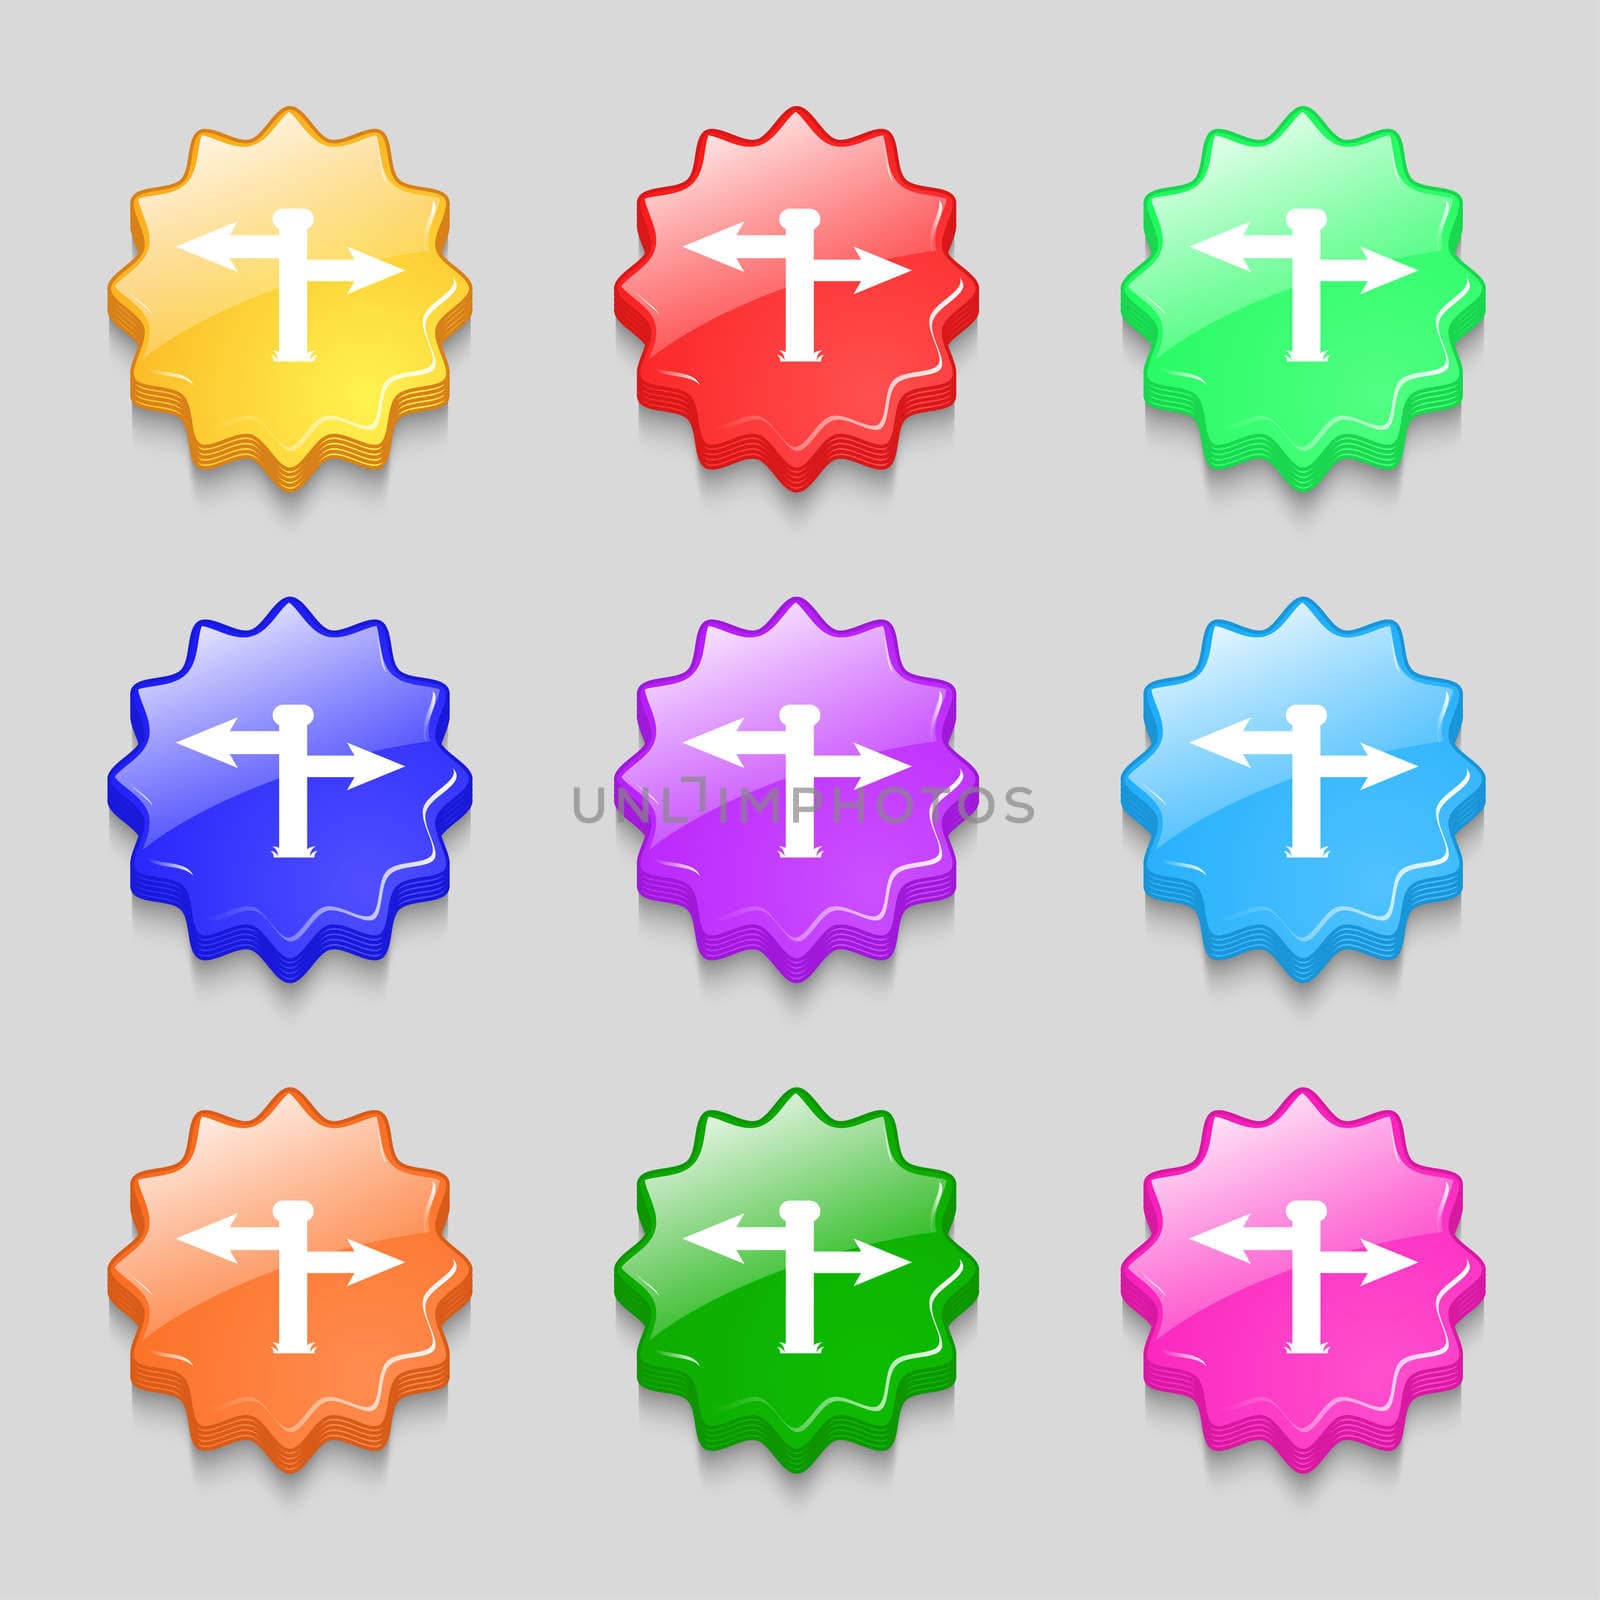 Blank Road Sign icon sign. symbol on nine wavy colourful buttons. illustration